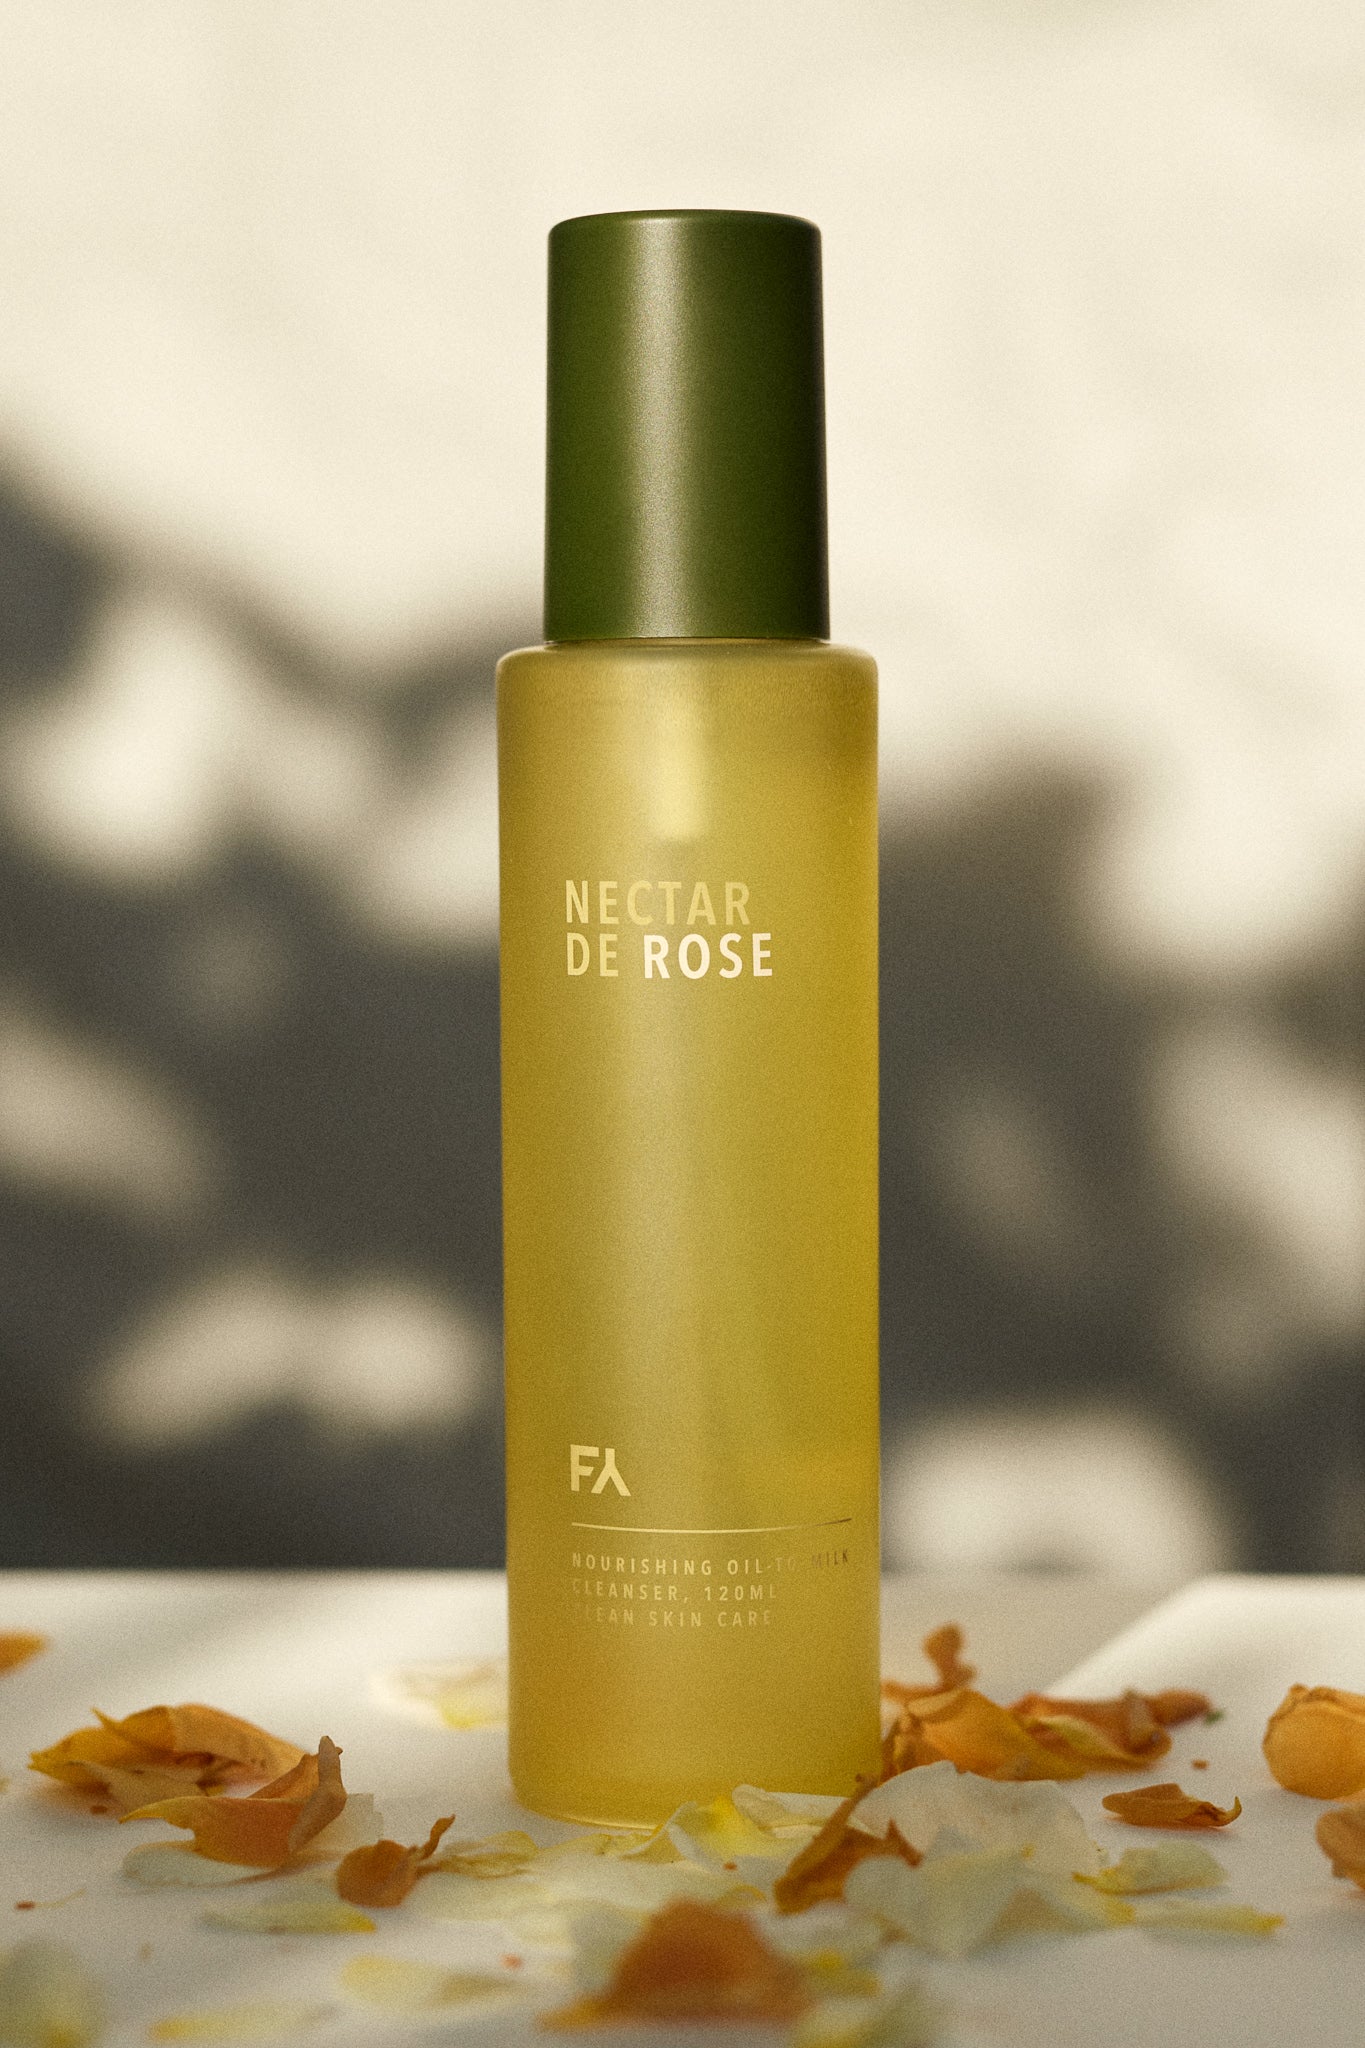 Campaign shot of the Nectar De Rose Nourishing Oil-to-Milk Cleanser with rose petals all around